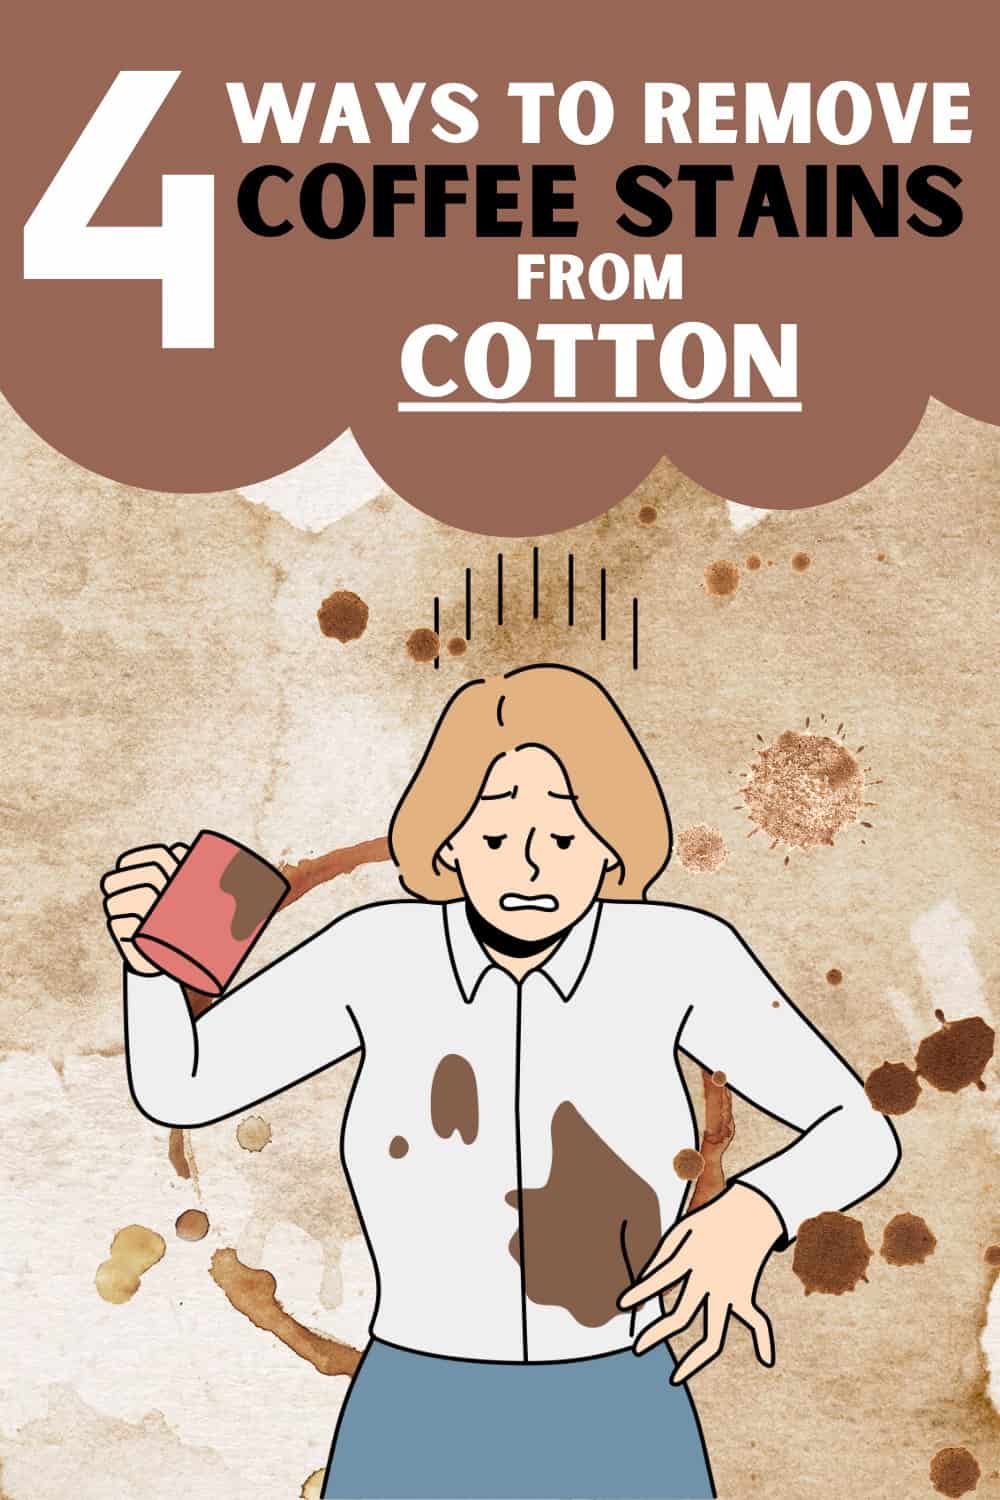 Press and hold the napkin or tissue onto the coffee stain